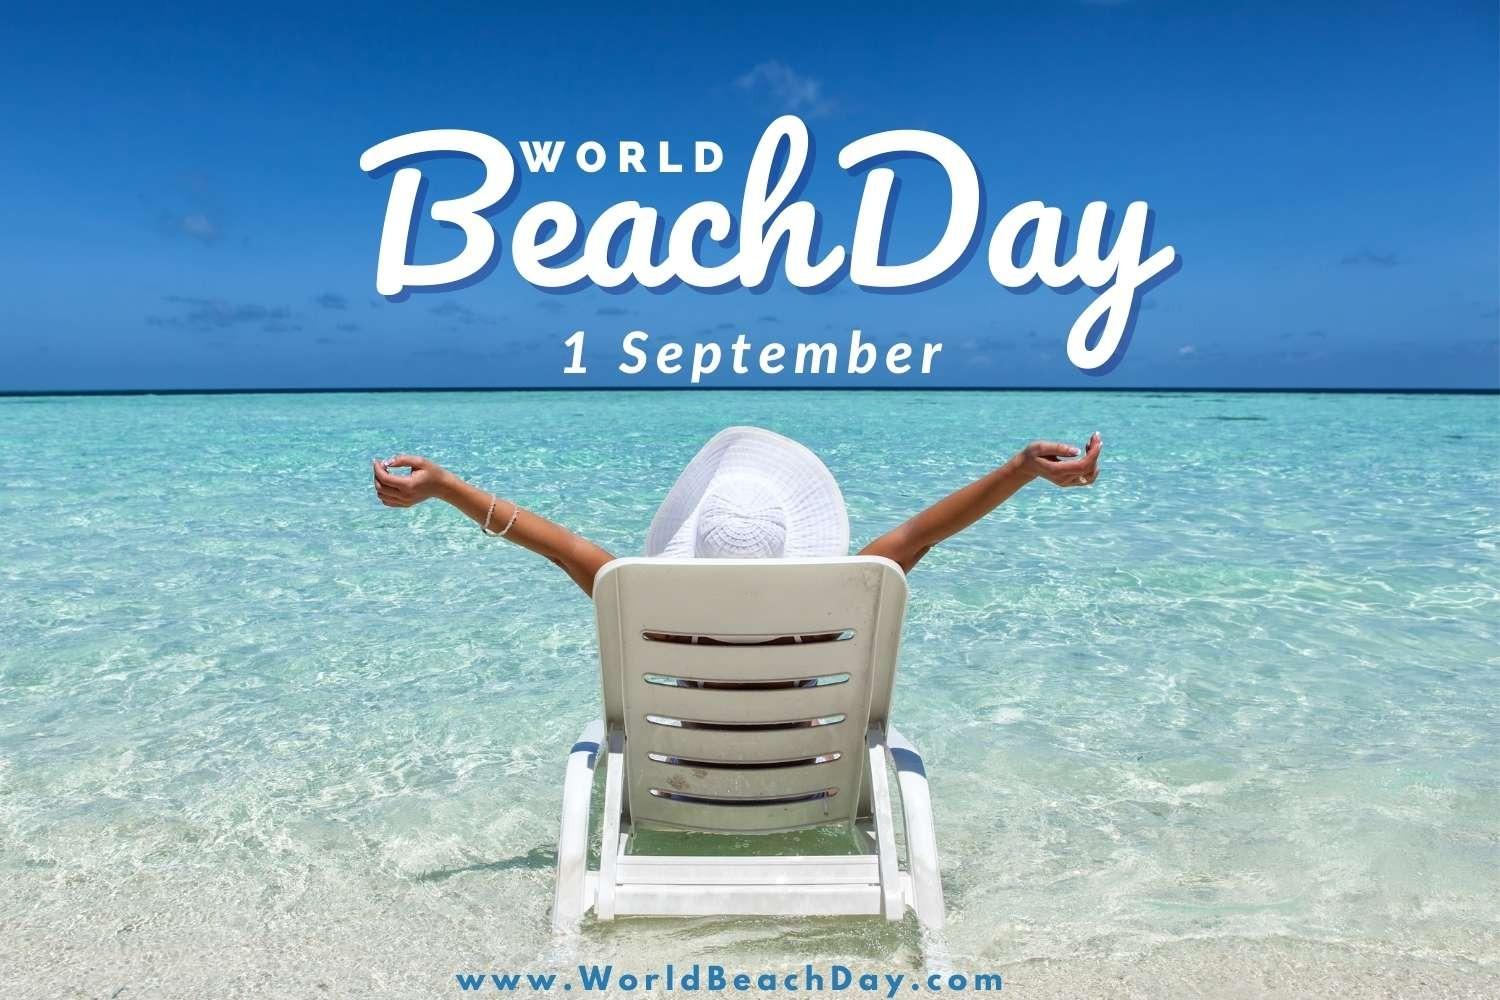 World Beach Day is more than just a fun day at the beach